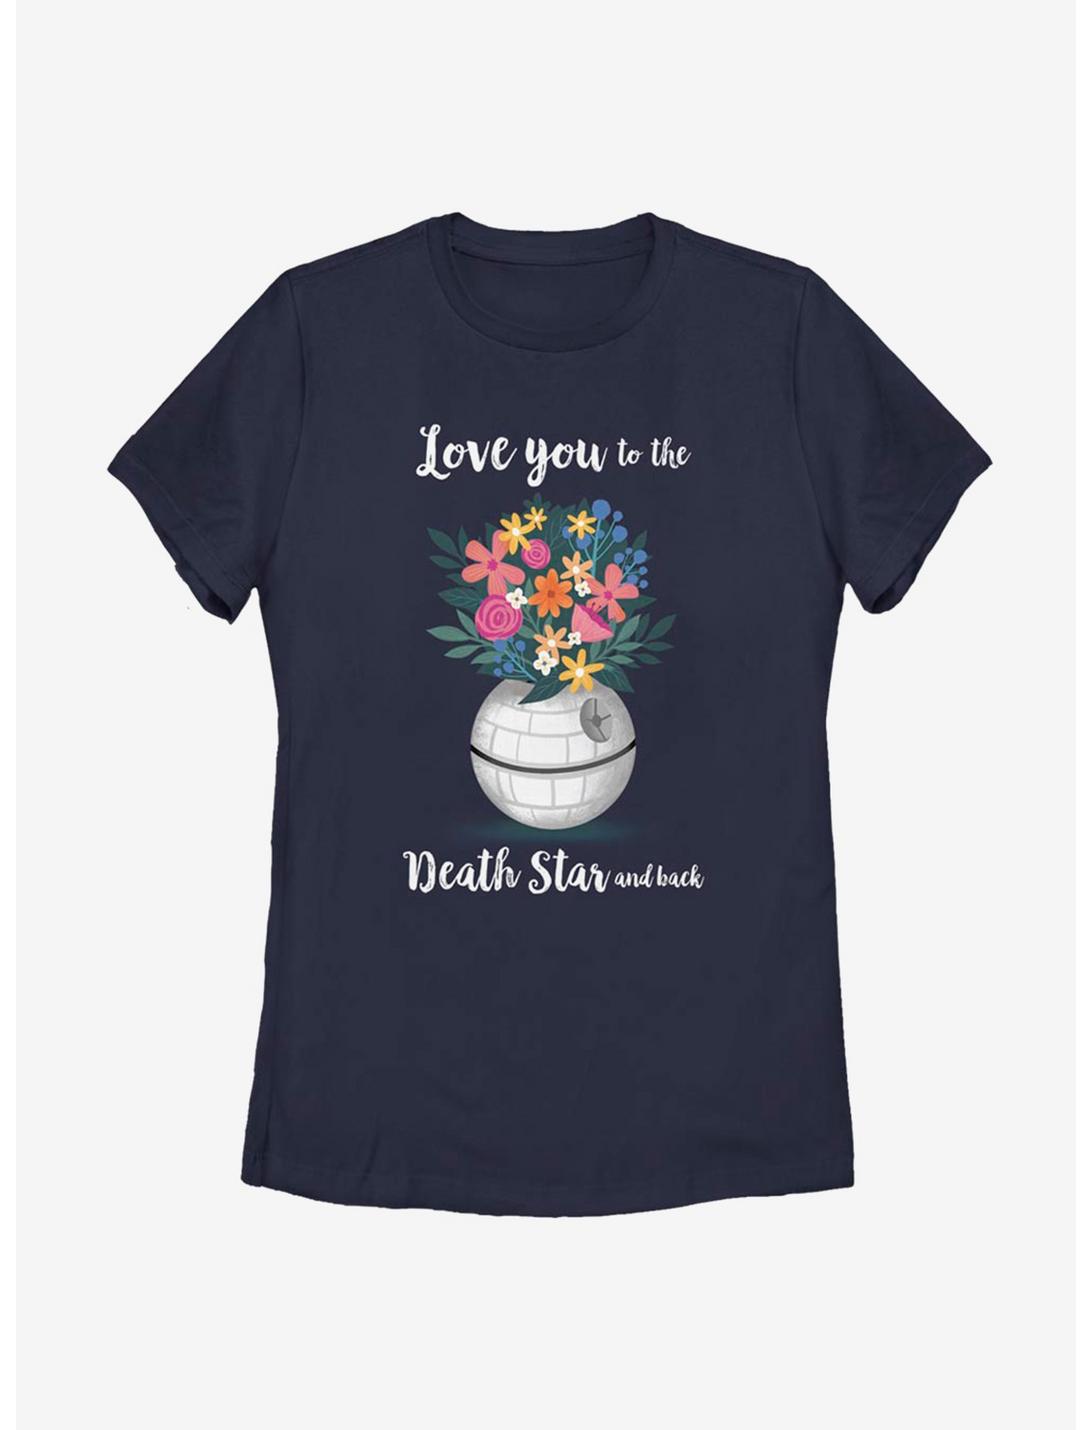 Star Wars Death Star And Back Womens T-Shirt, NAVY, hi-res